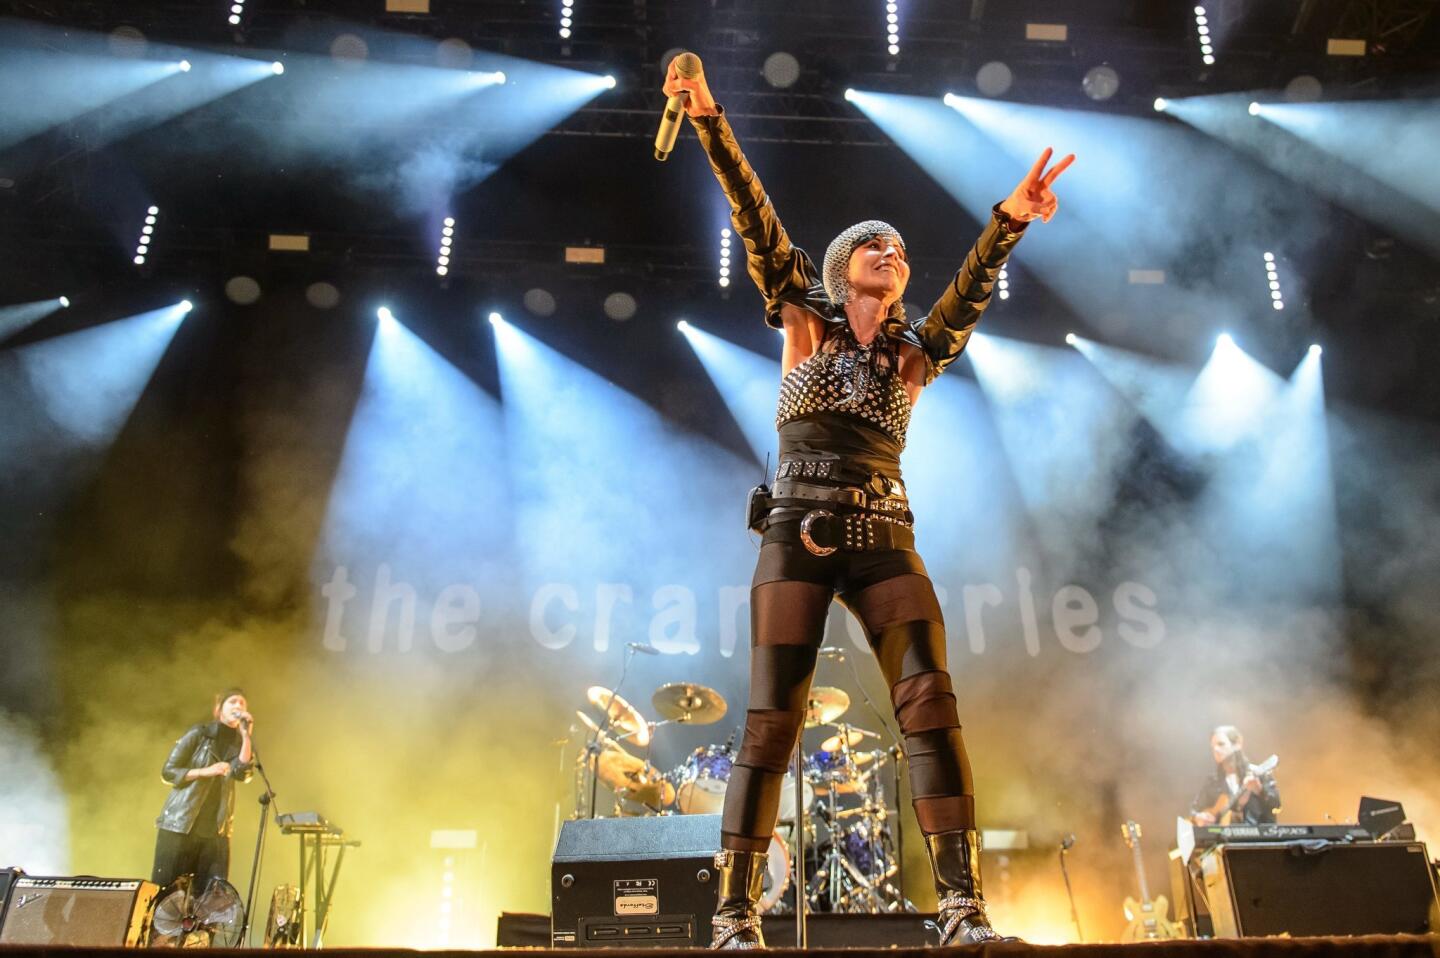 The singer Dolores O'Riordan of the Irish group the Cranberries performs onstage duringa concert in Lublin, Poland, on June 3, 2016.